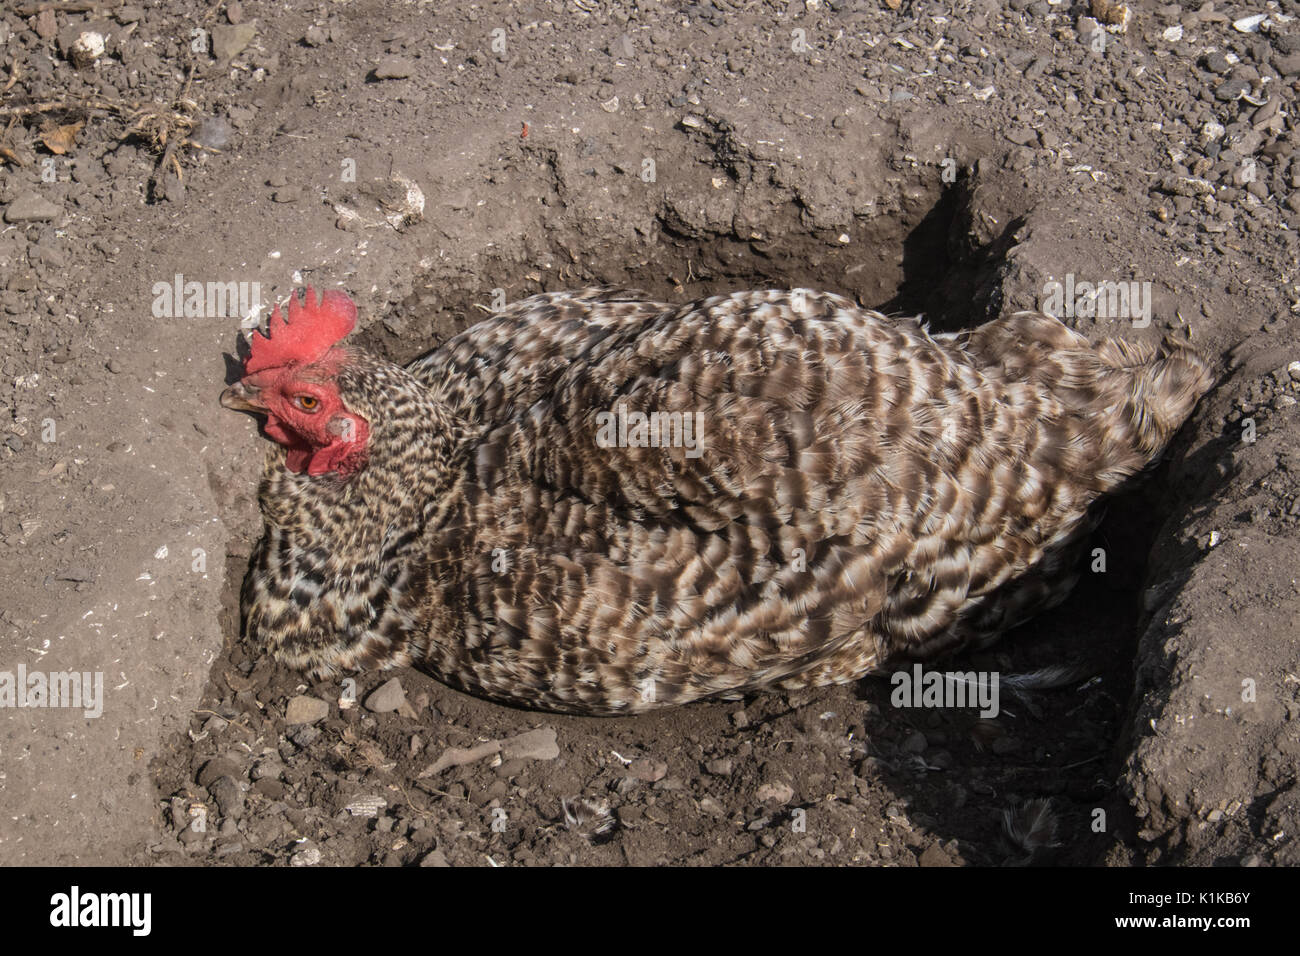 Small,number,of,my,backyard,chickens,in,my,MODEL RELEASED,PROPERTY RELEASED garden, in Wales,village,Welsh,U.K.,UK,Europe, Stock Photo